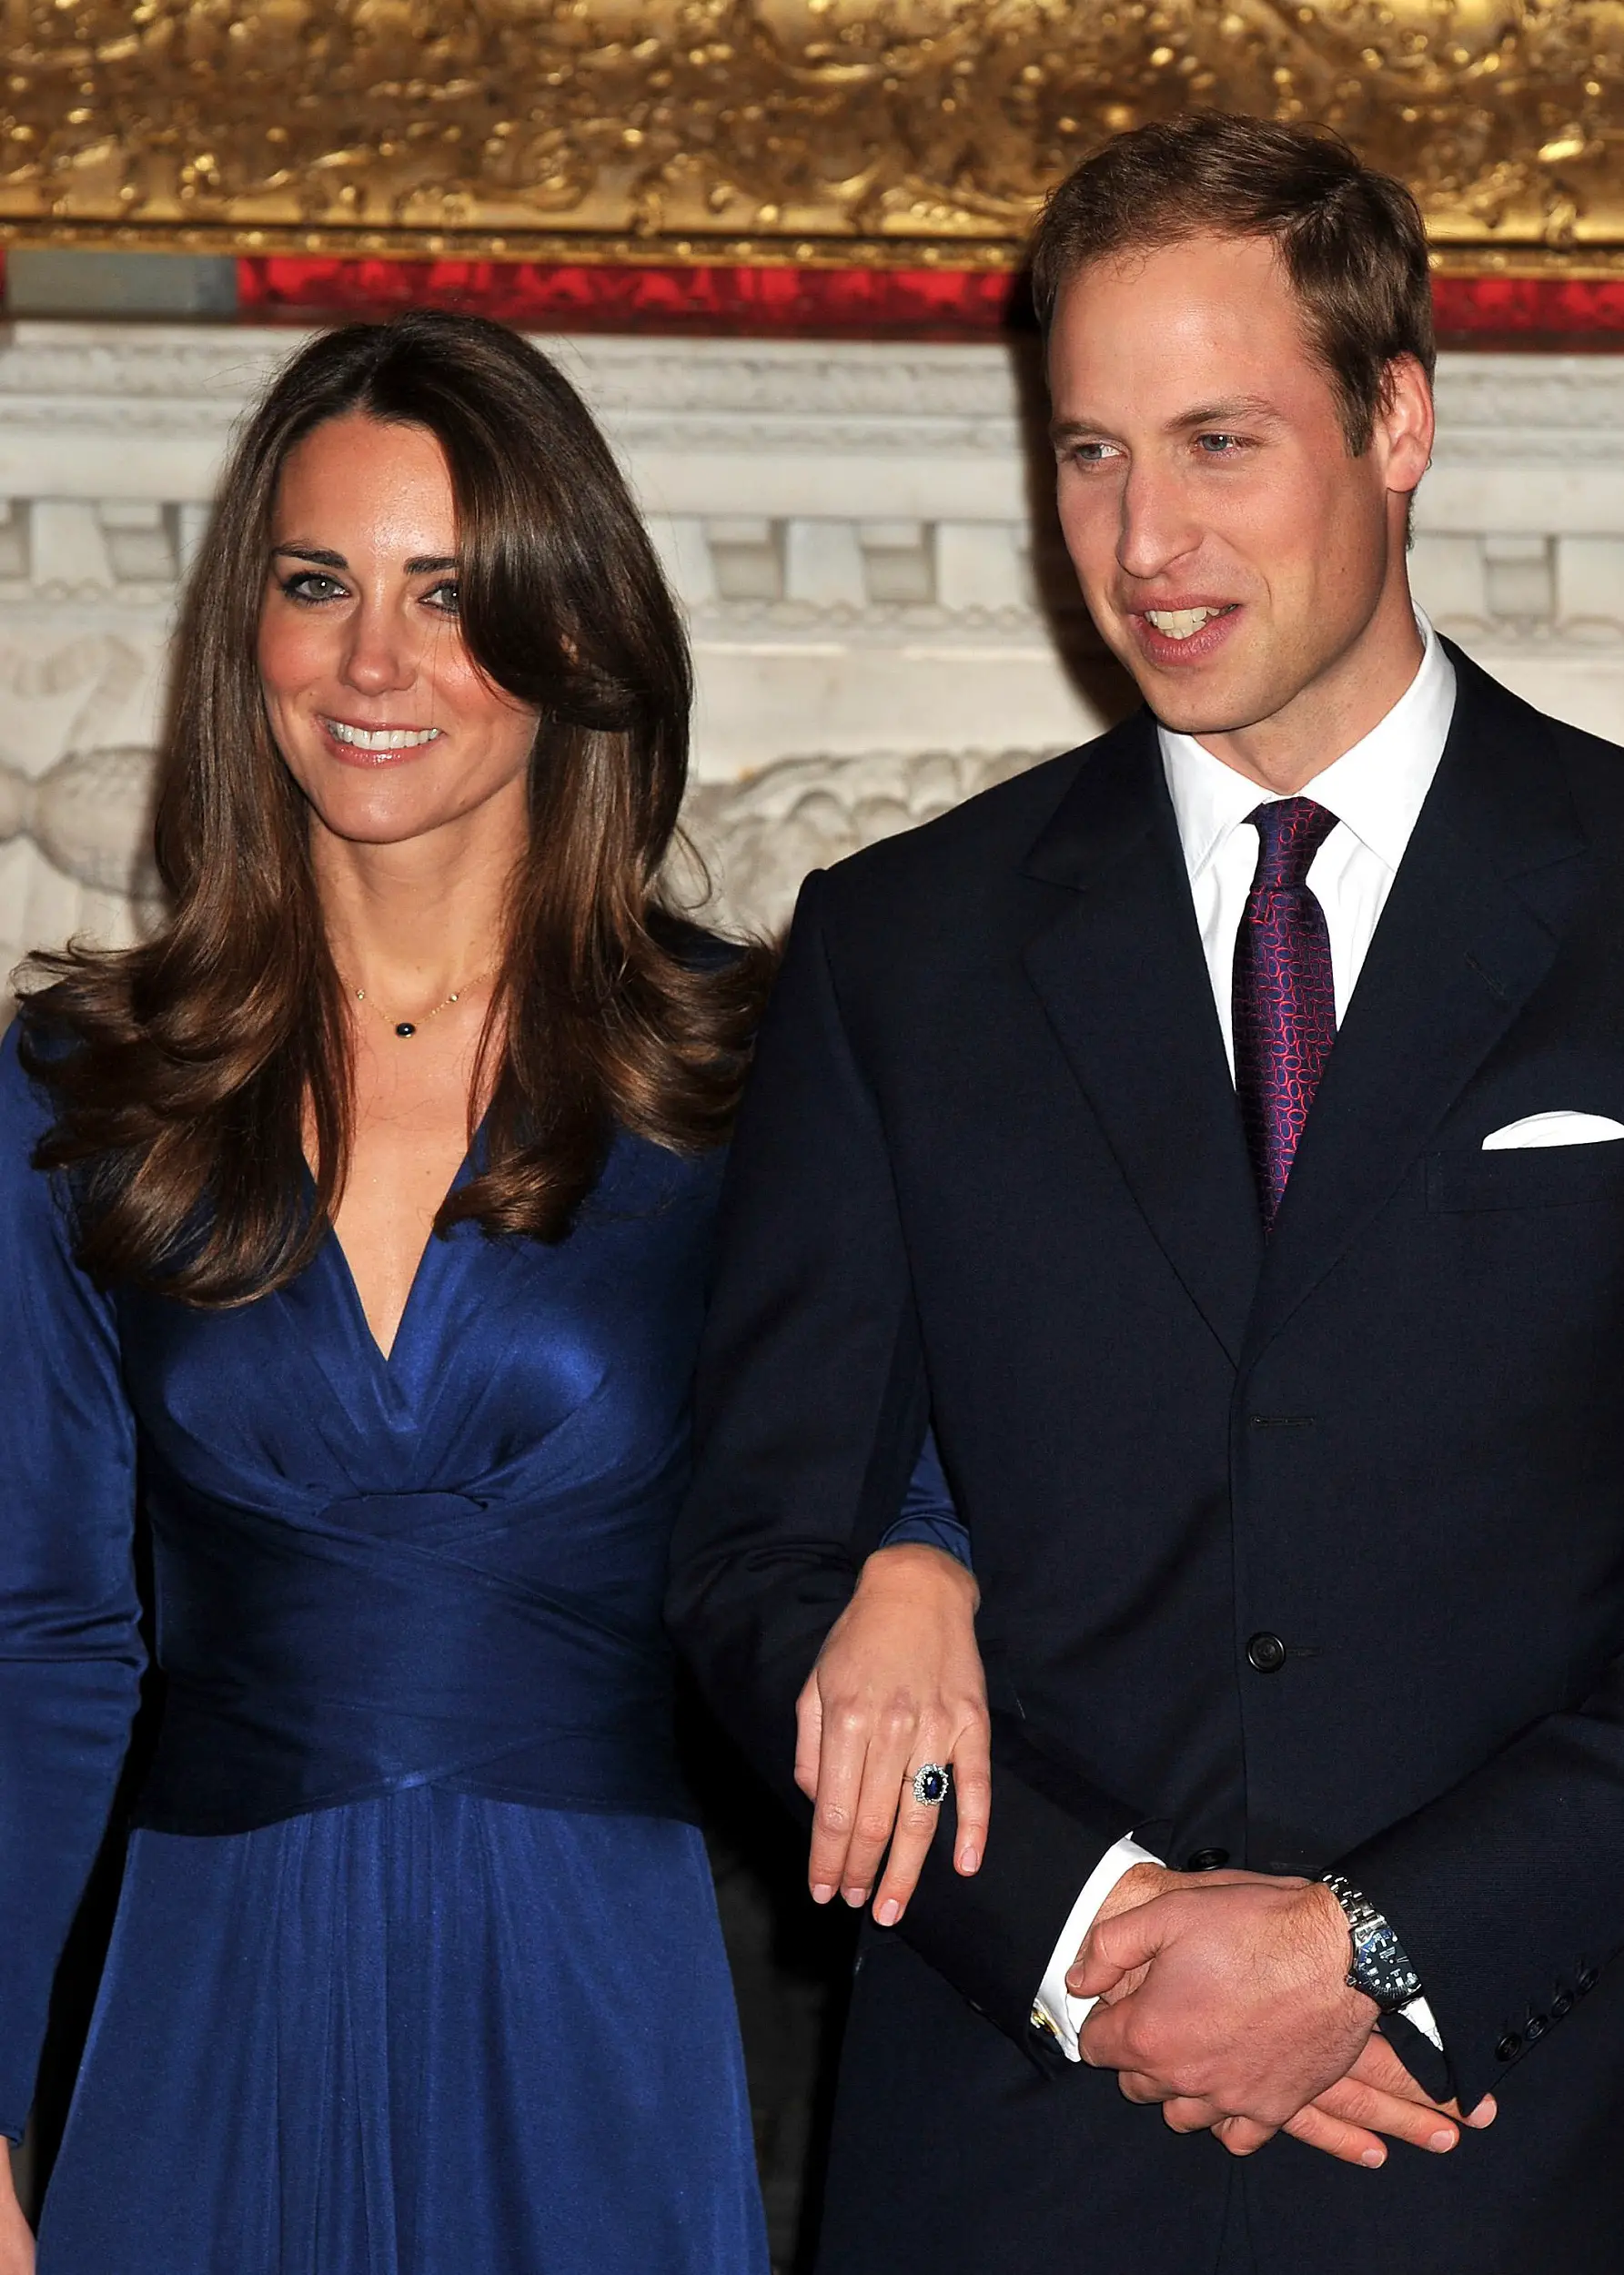 Prince William engagement and Kate Middleton engageent annoucement